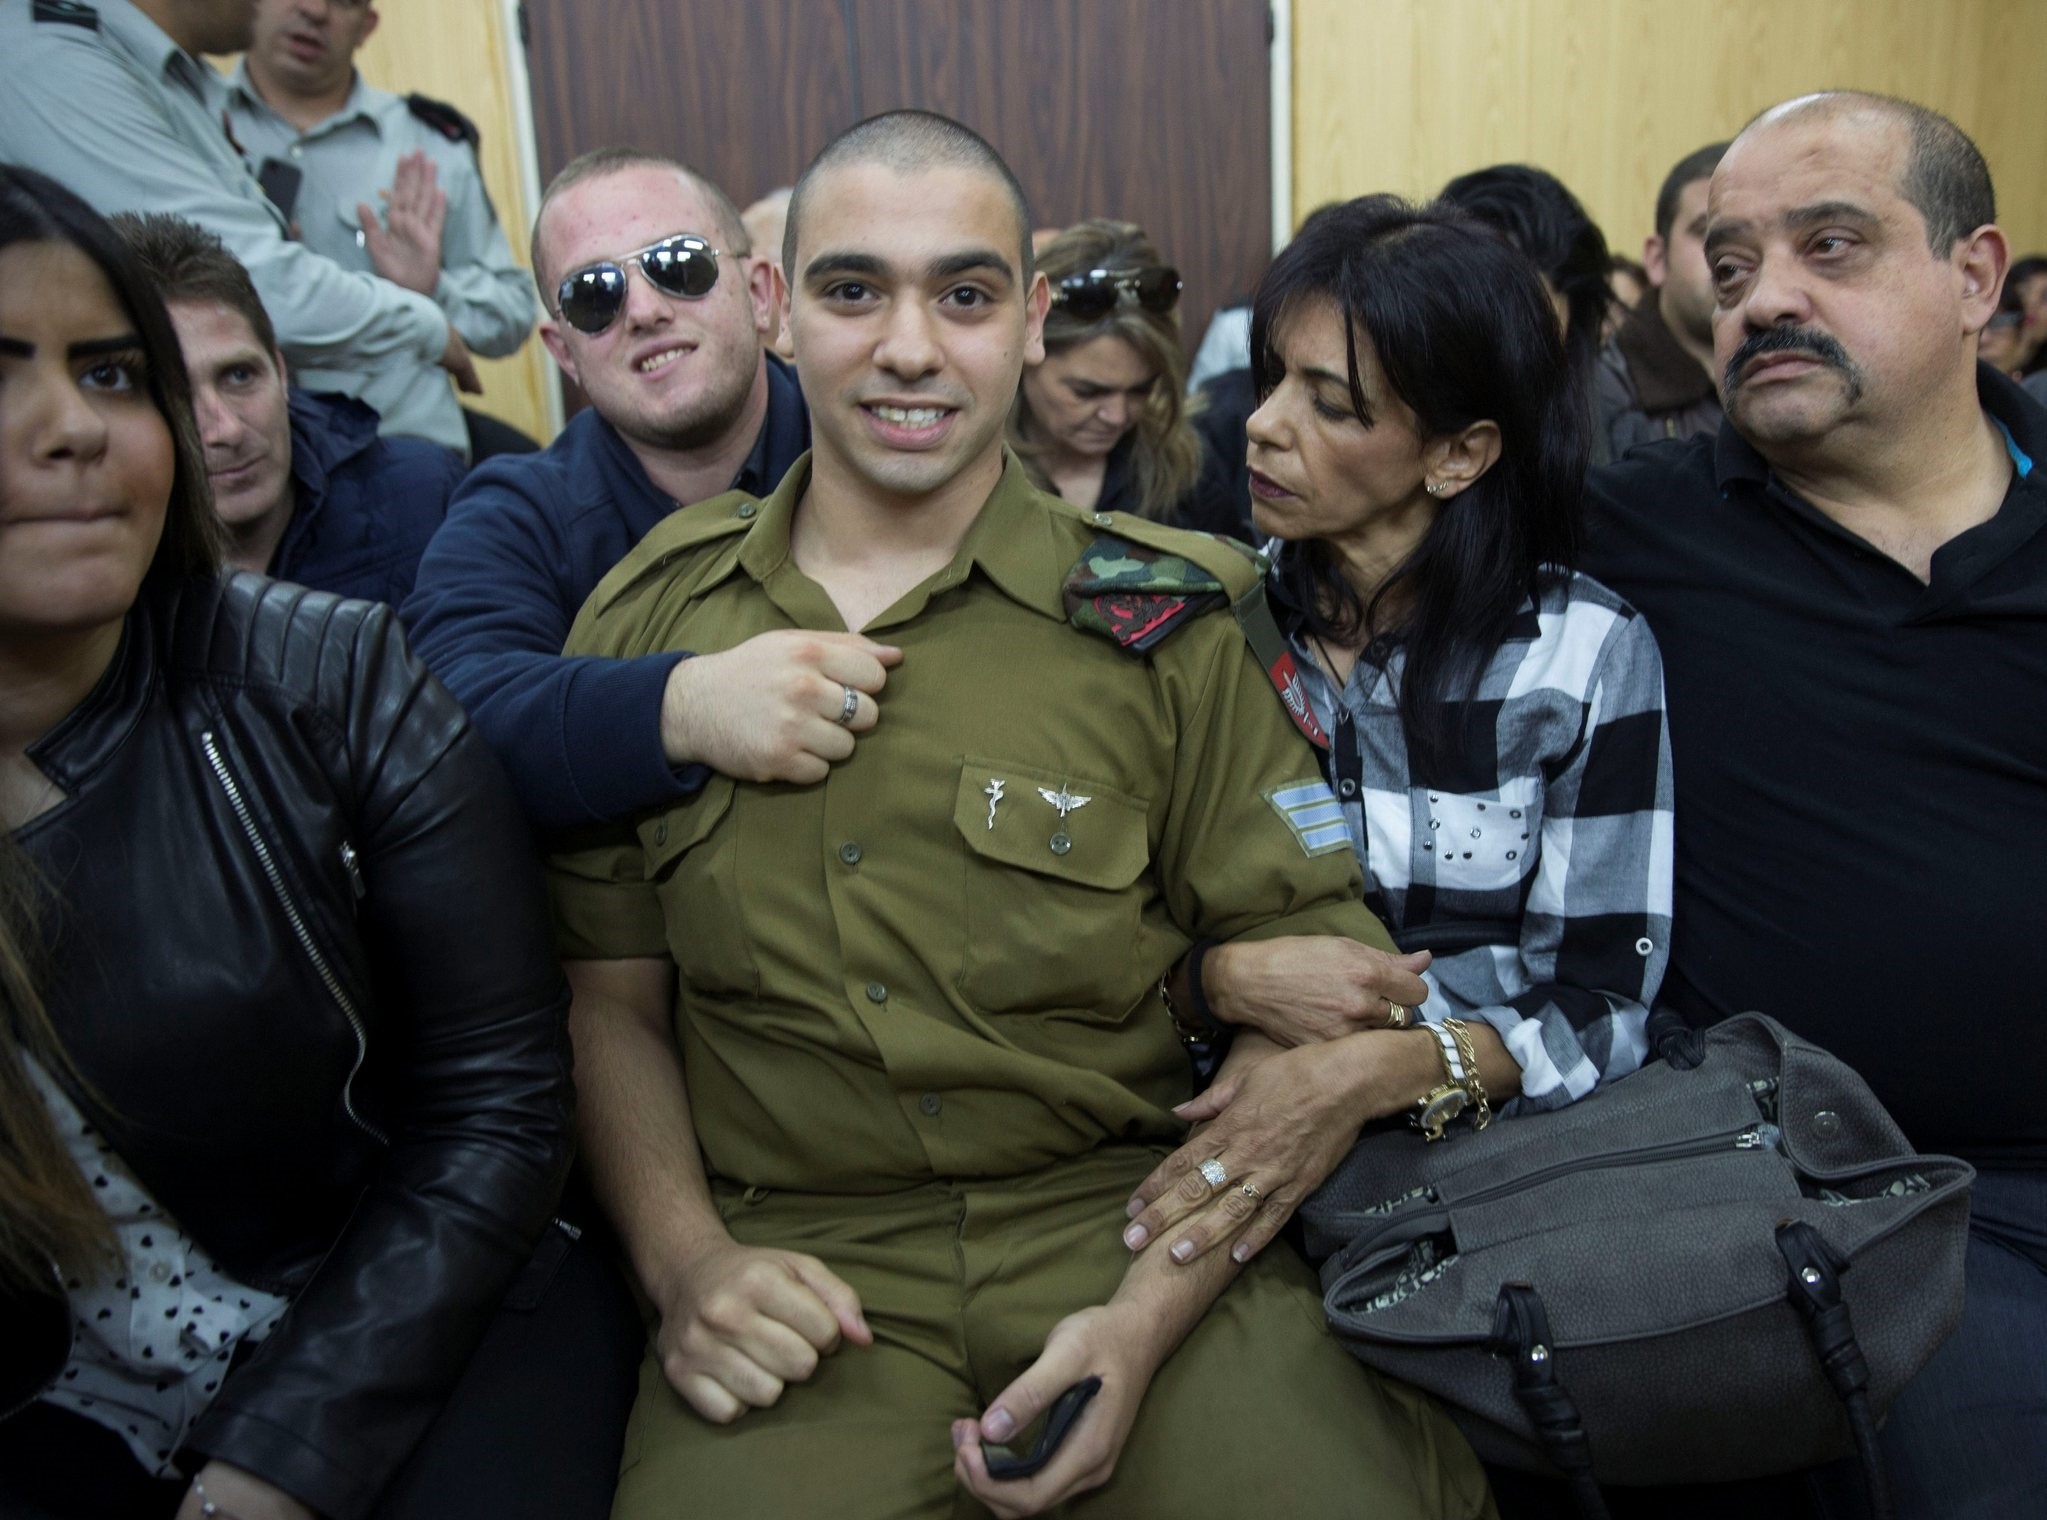 Israeli soldier Elor Azaria, who is charged with manslaughter by the Israeli military, sits to hear his verdict in a military court in Tel Aviv, Israel, January 4, 2017. (REUTERS Photo)